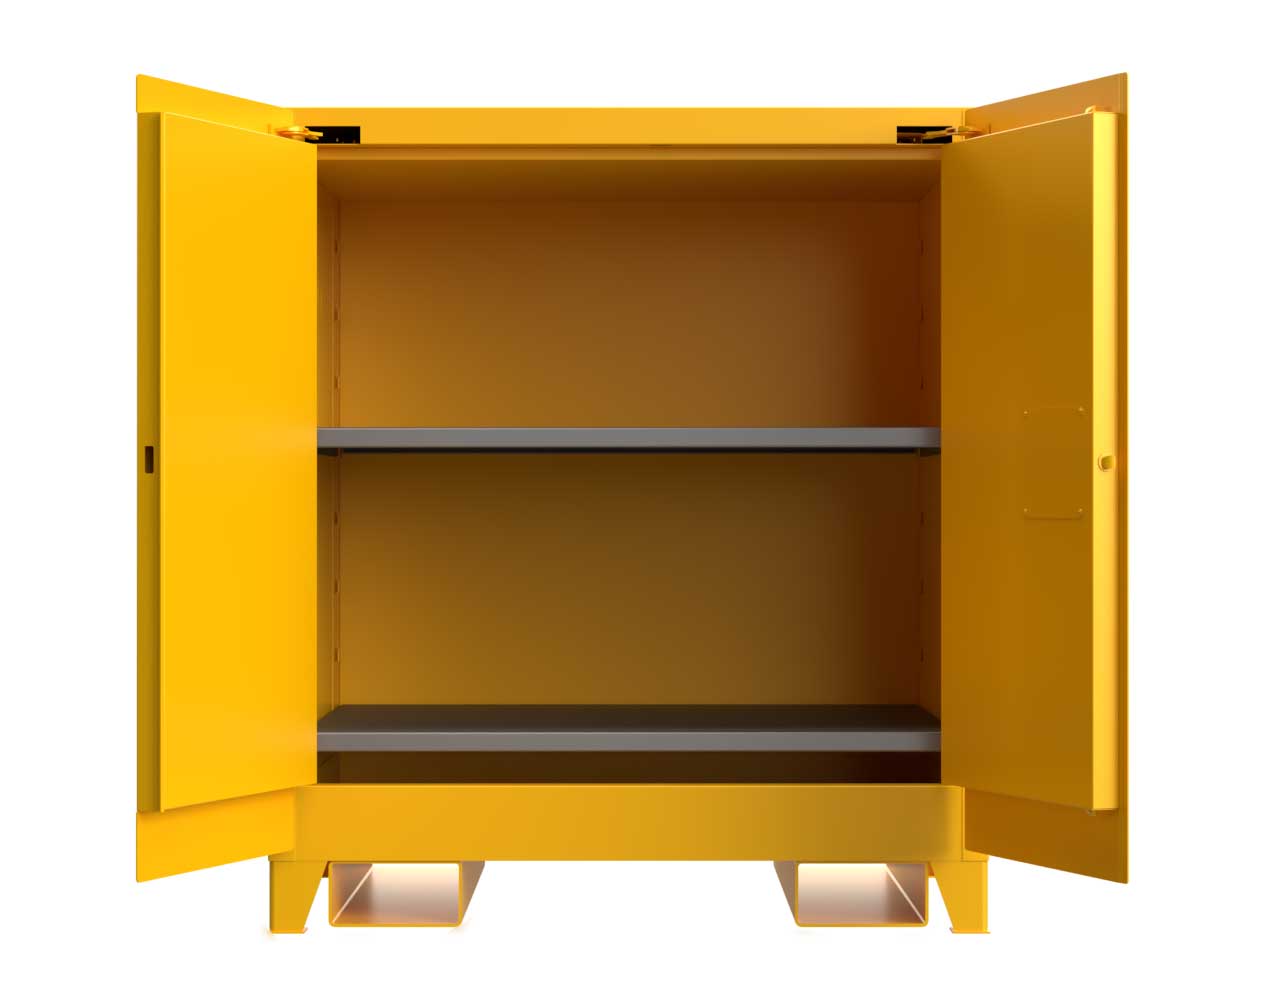 43 in. X 49 in. Flammable Safety Cabinet with Self Closing Doors - 0